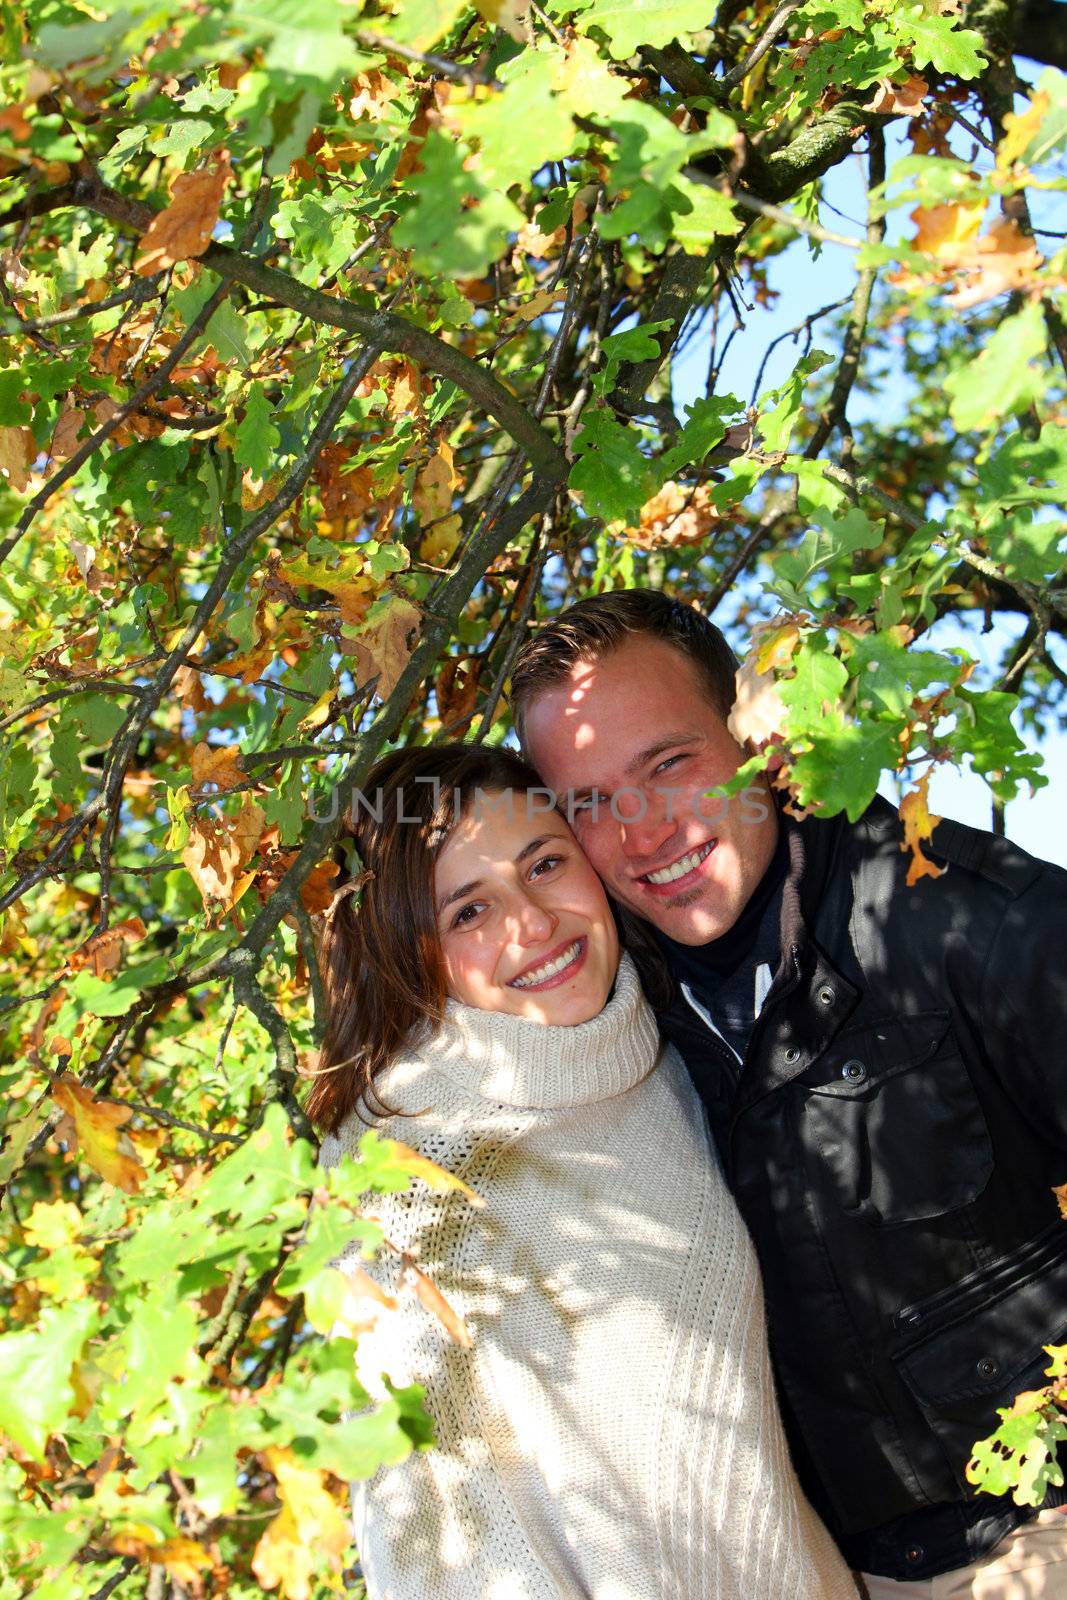 Attractive loving young couple posing close together amongst autumn foliage on a tree with copyspace Attractive loving young couple posing amongst autumn foliage on a tree with copyspace